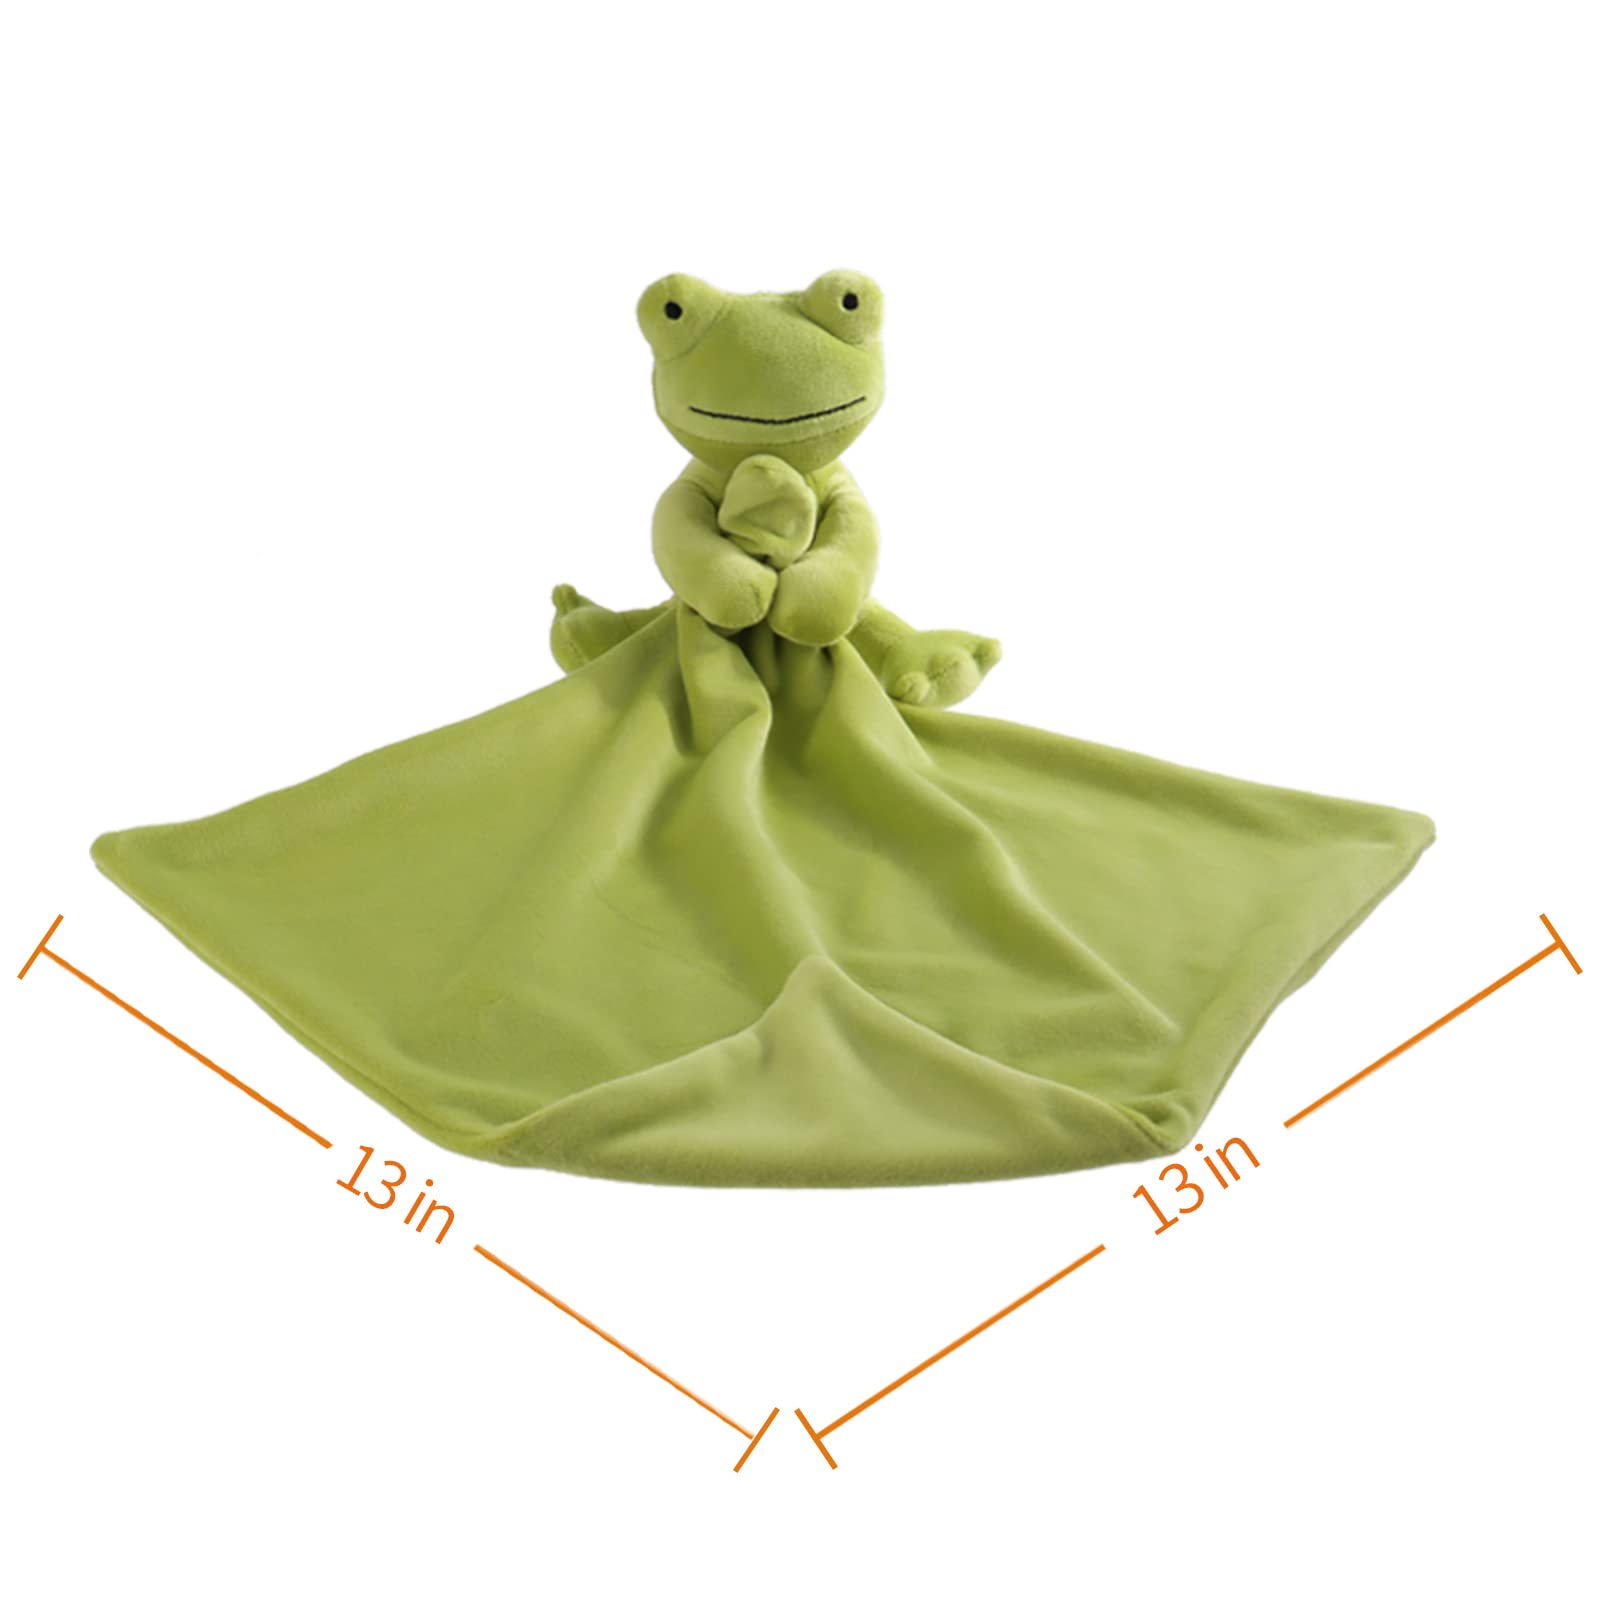 Apricot Lamb Stuffed Animals Security Blanket Green Frog Infant Nursery Character Blanket Luxury Snuggler Plush(Green Frog, 13 Inches)